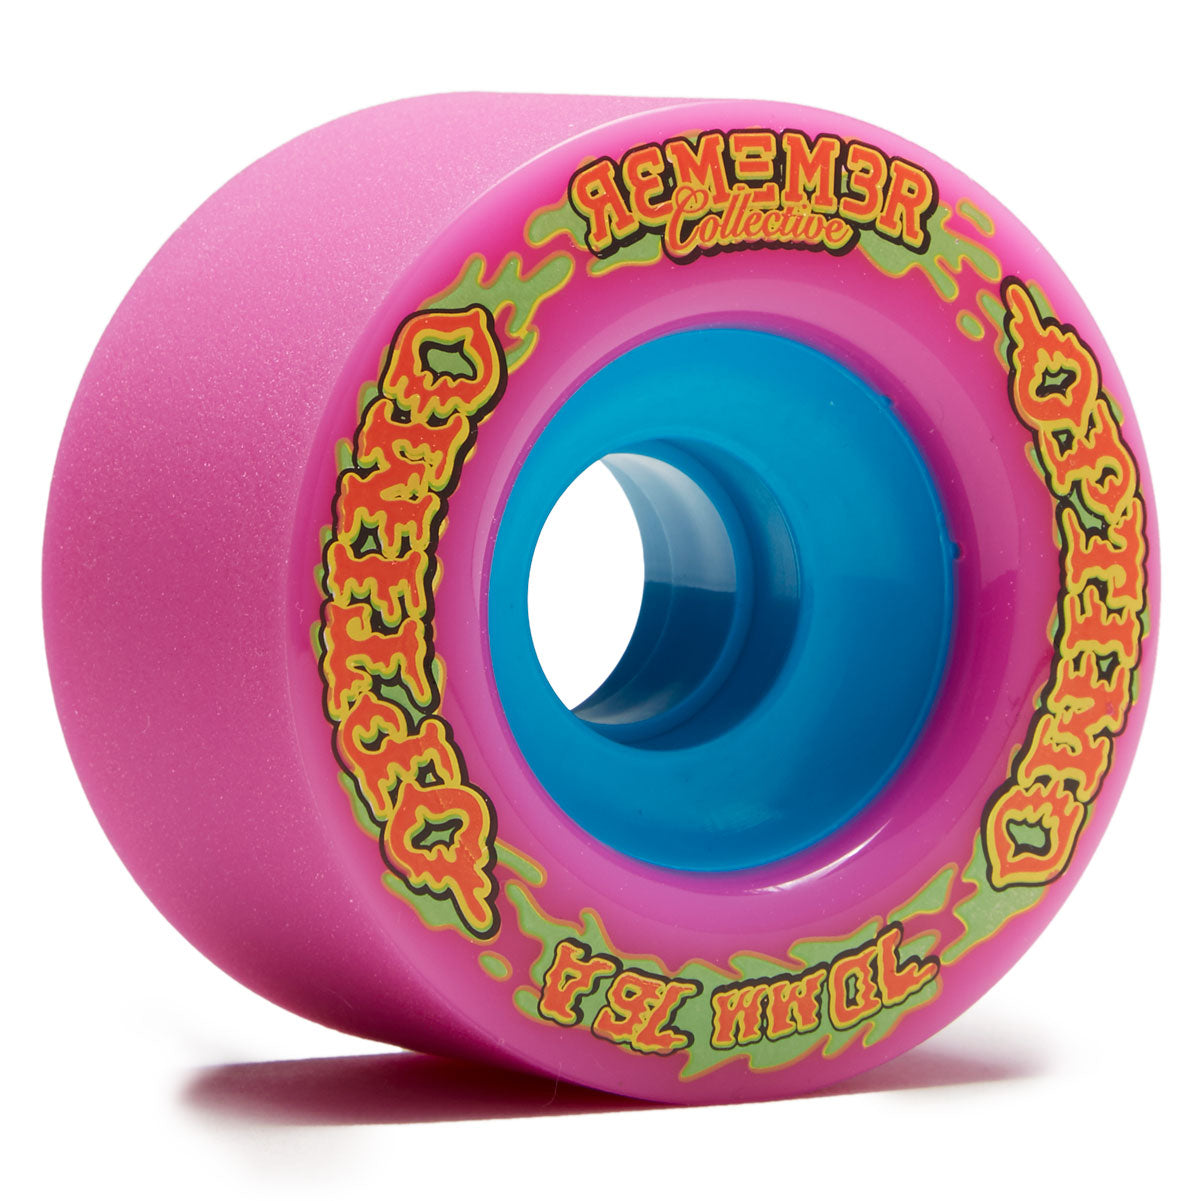 Remember Optimo 76a Longboard Wheels - Pink - 70mm image 1